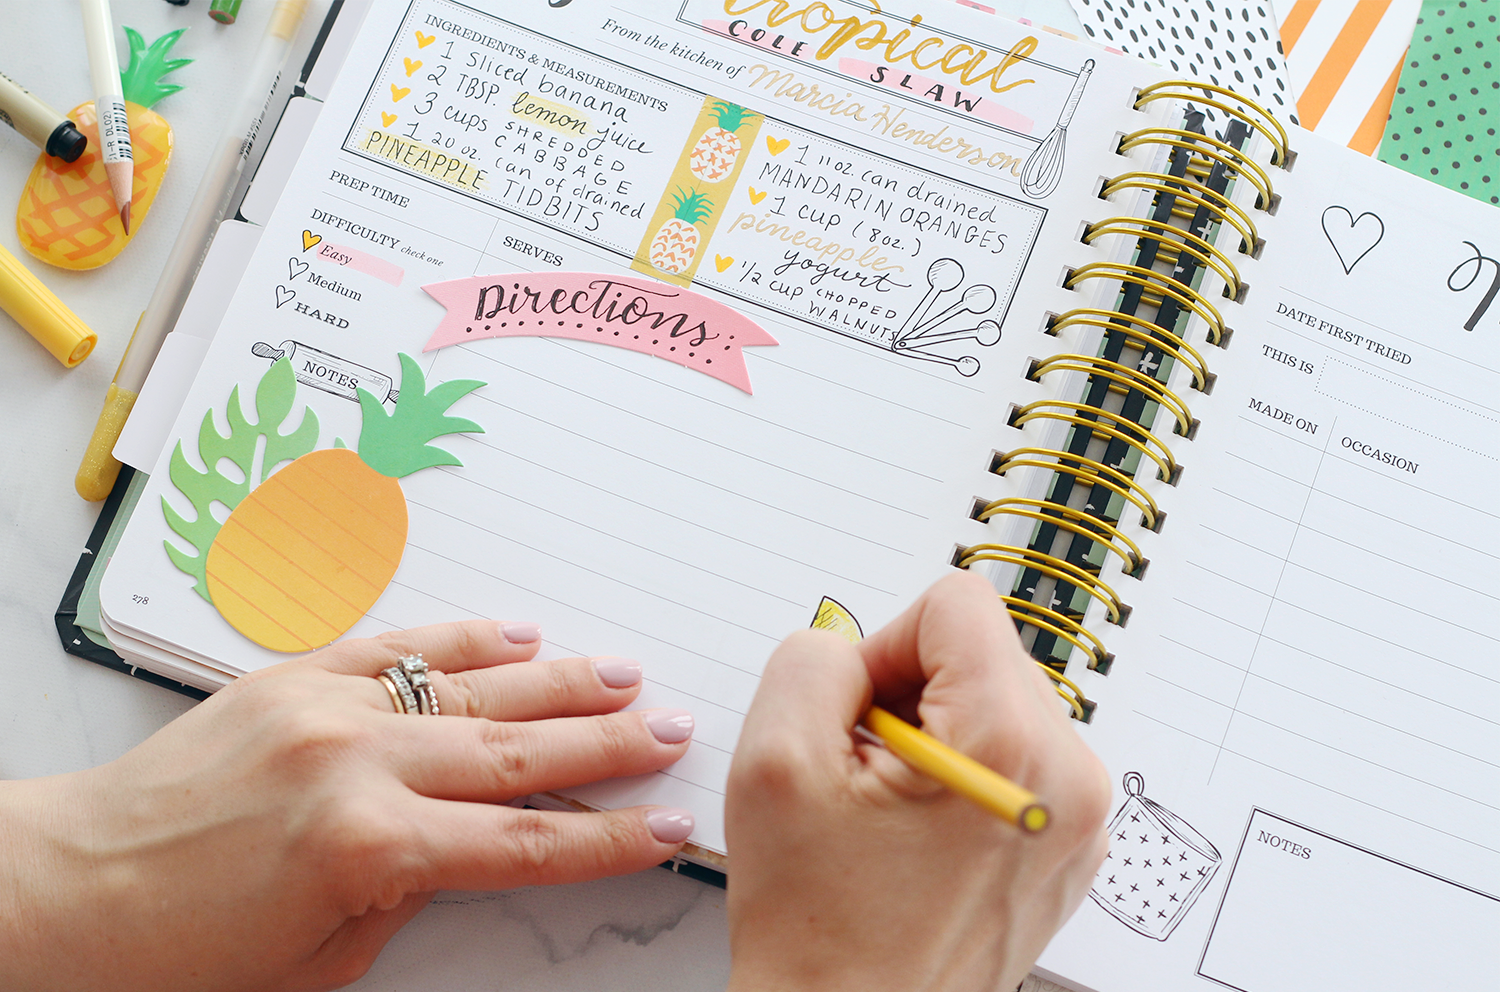 The Keepsake Kitchen Diary allows you to record recipes and memories in meaningful ways. 